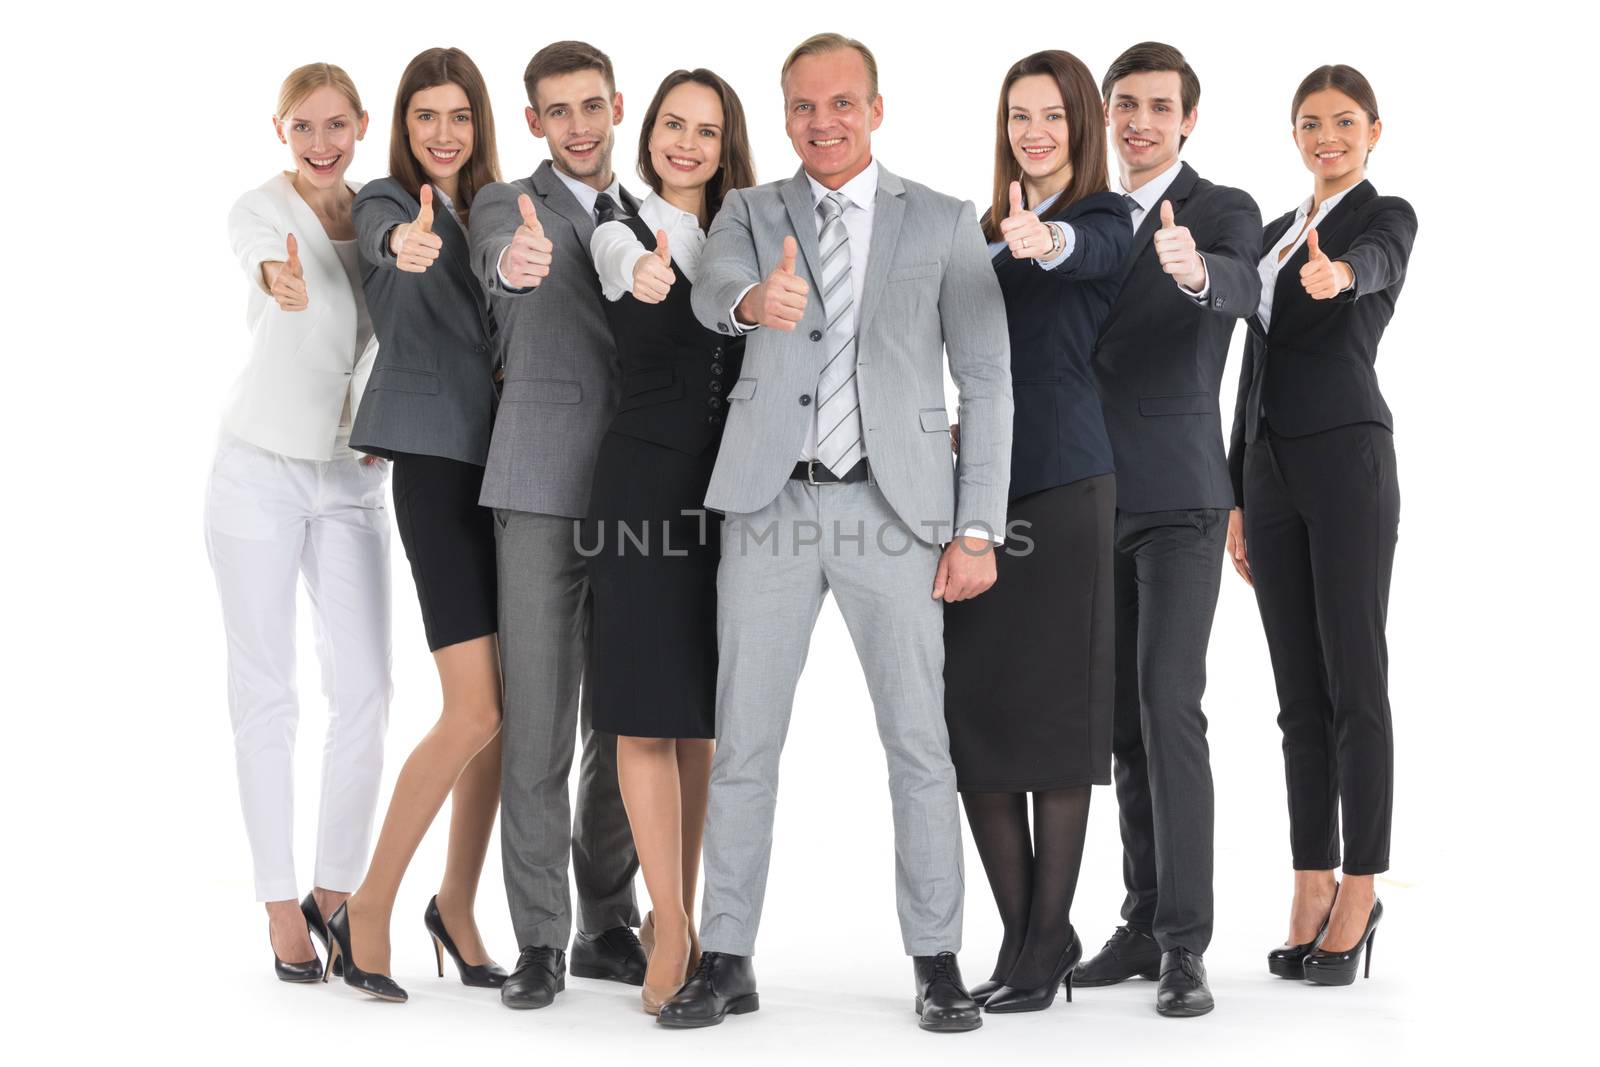 Happy business people cheering and showing thumb up, isolated on white background